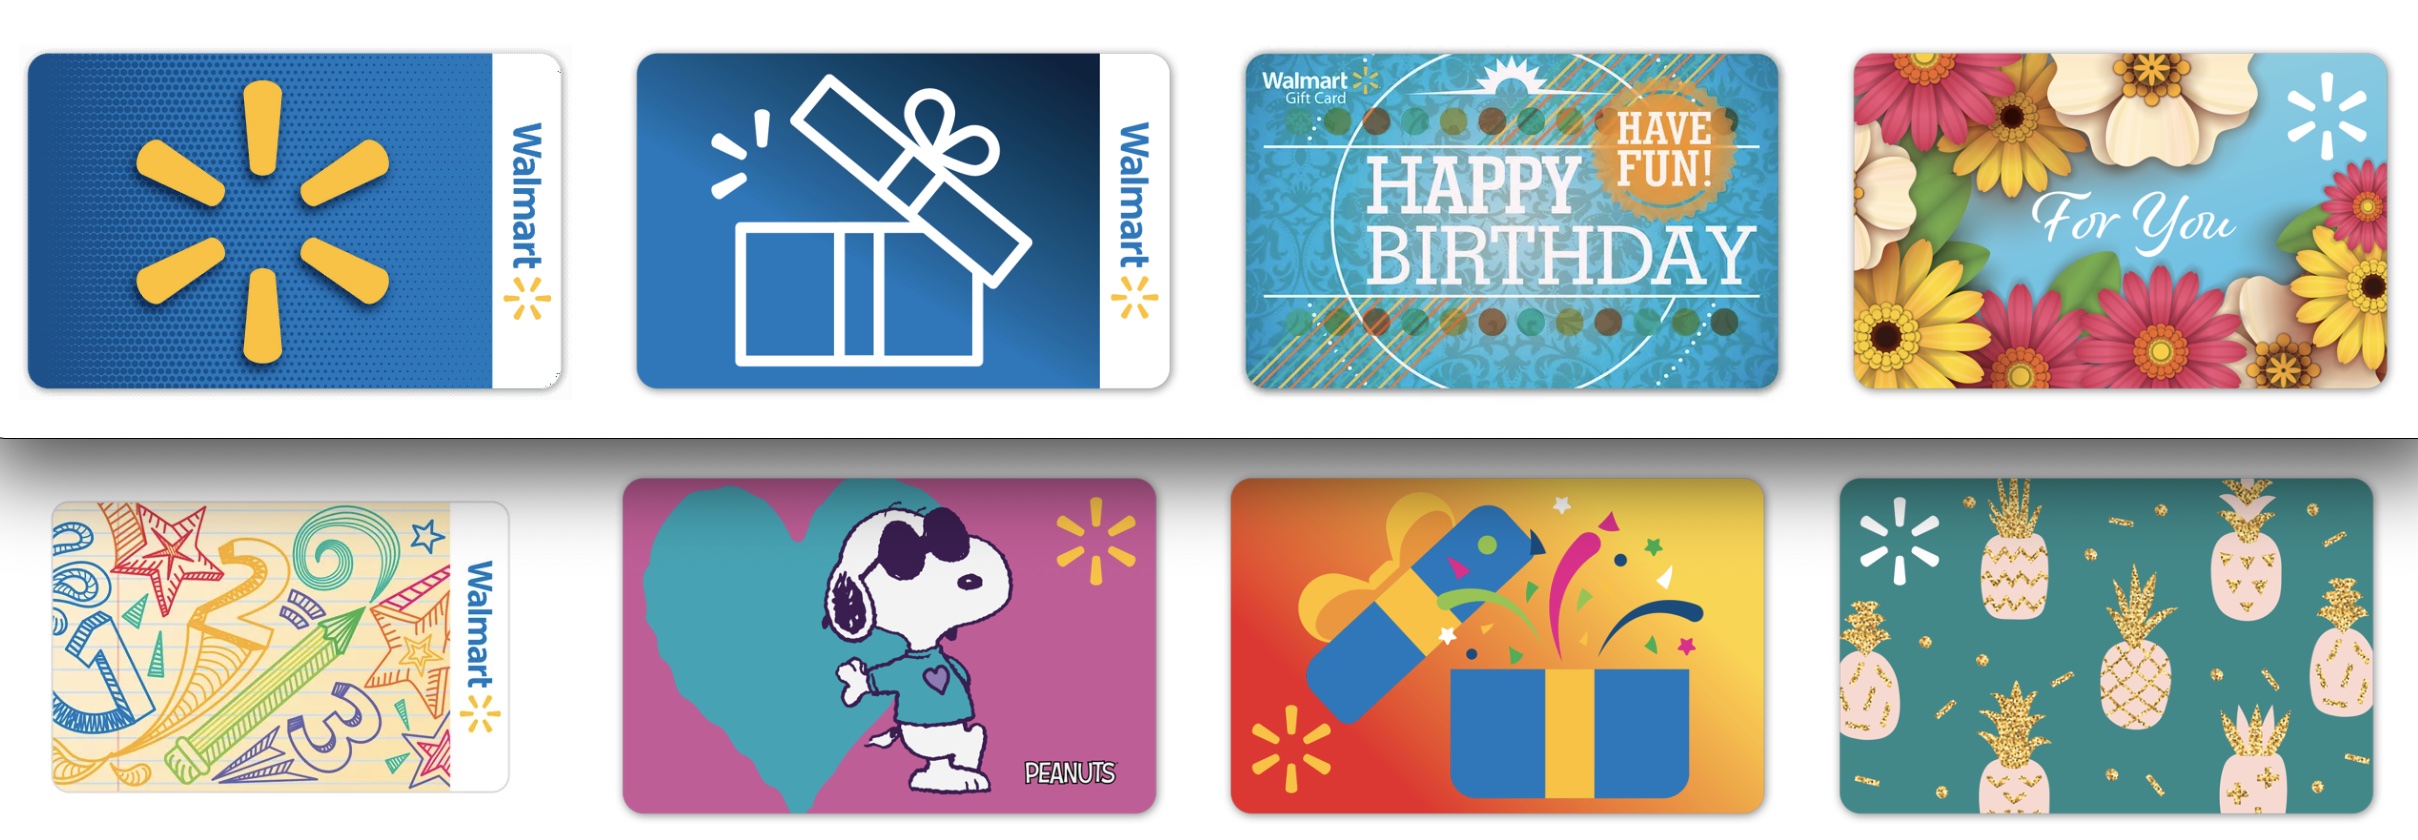 Can You Buy Gift Card With Walmart Gift Card?